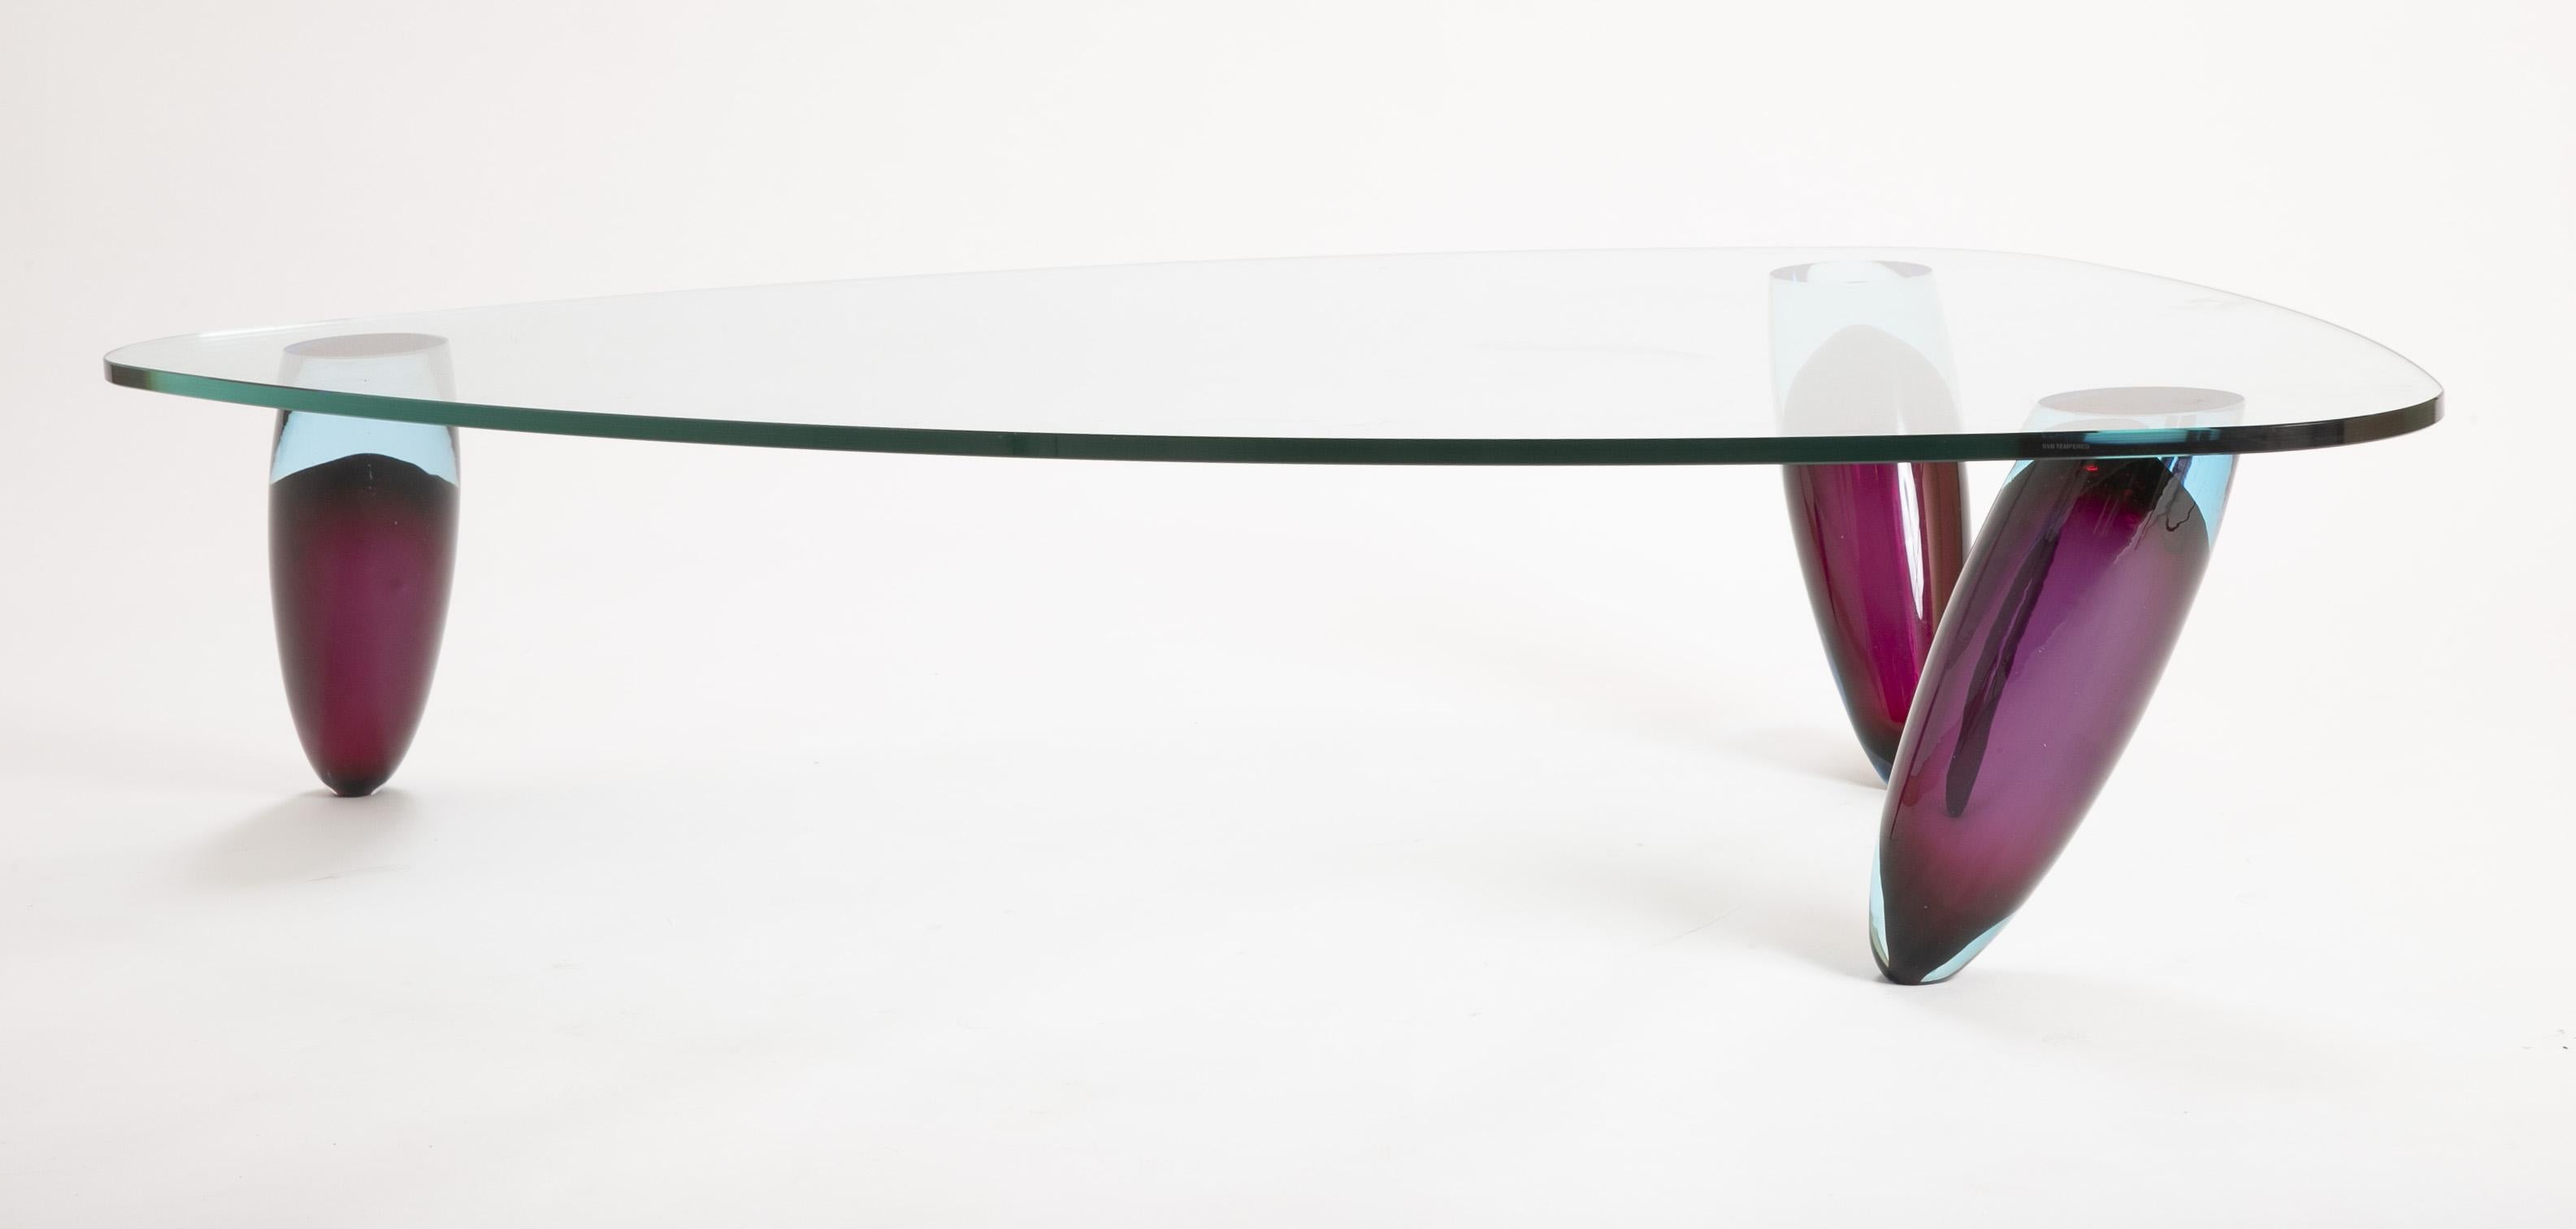 A beautiful Italian Murano glass coffee table with Sommerso glass legs by Maurice Barilone for Roche Bobois.